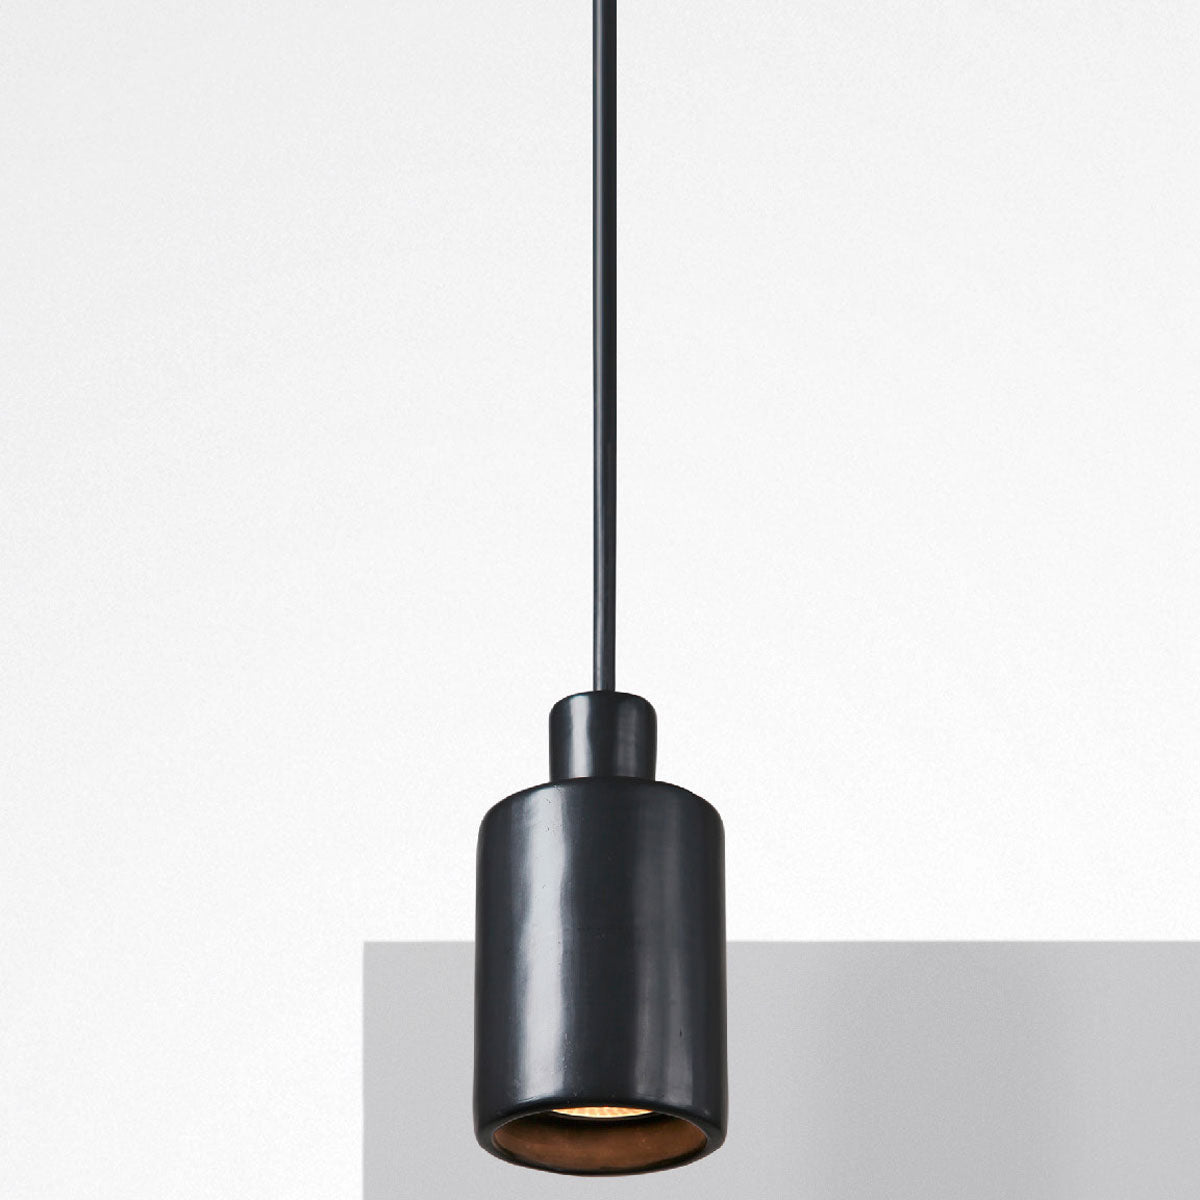 CAN I Pendant by David Pompa - $579.70 - $988.80